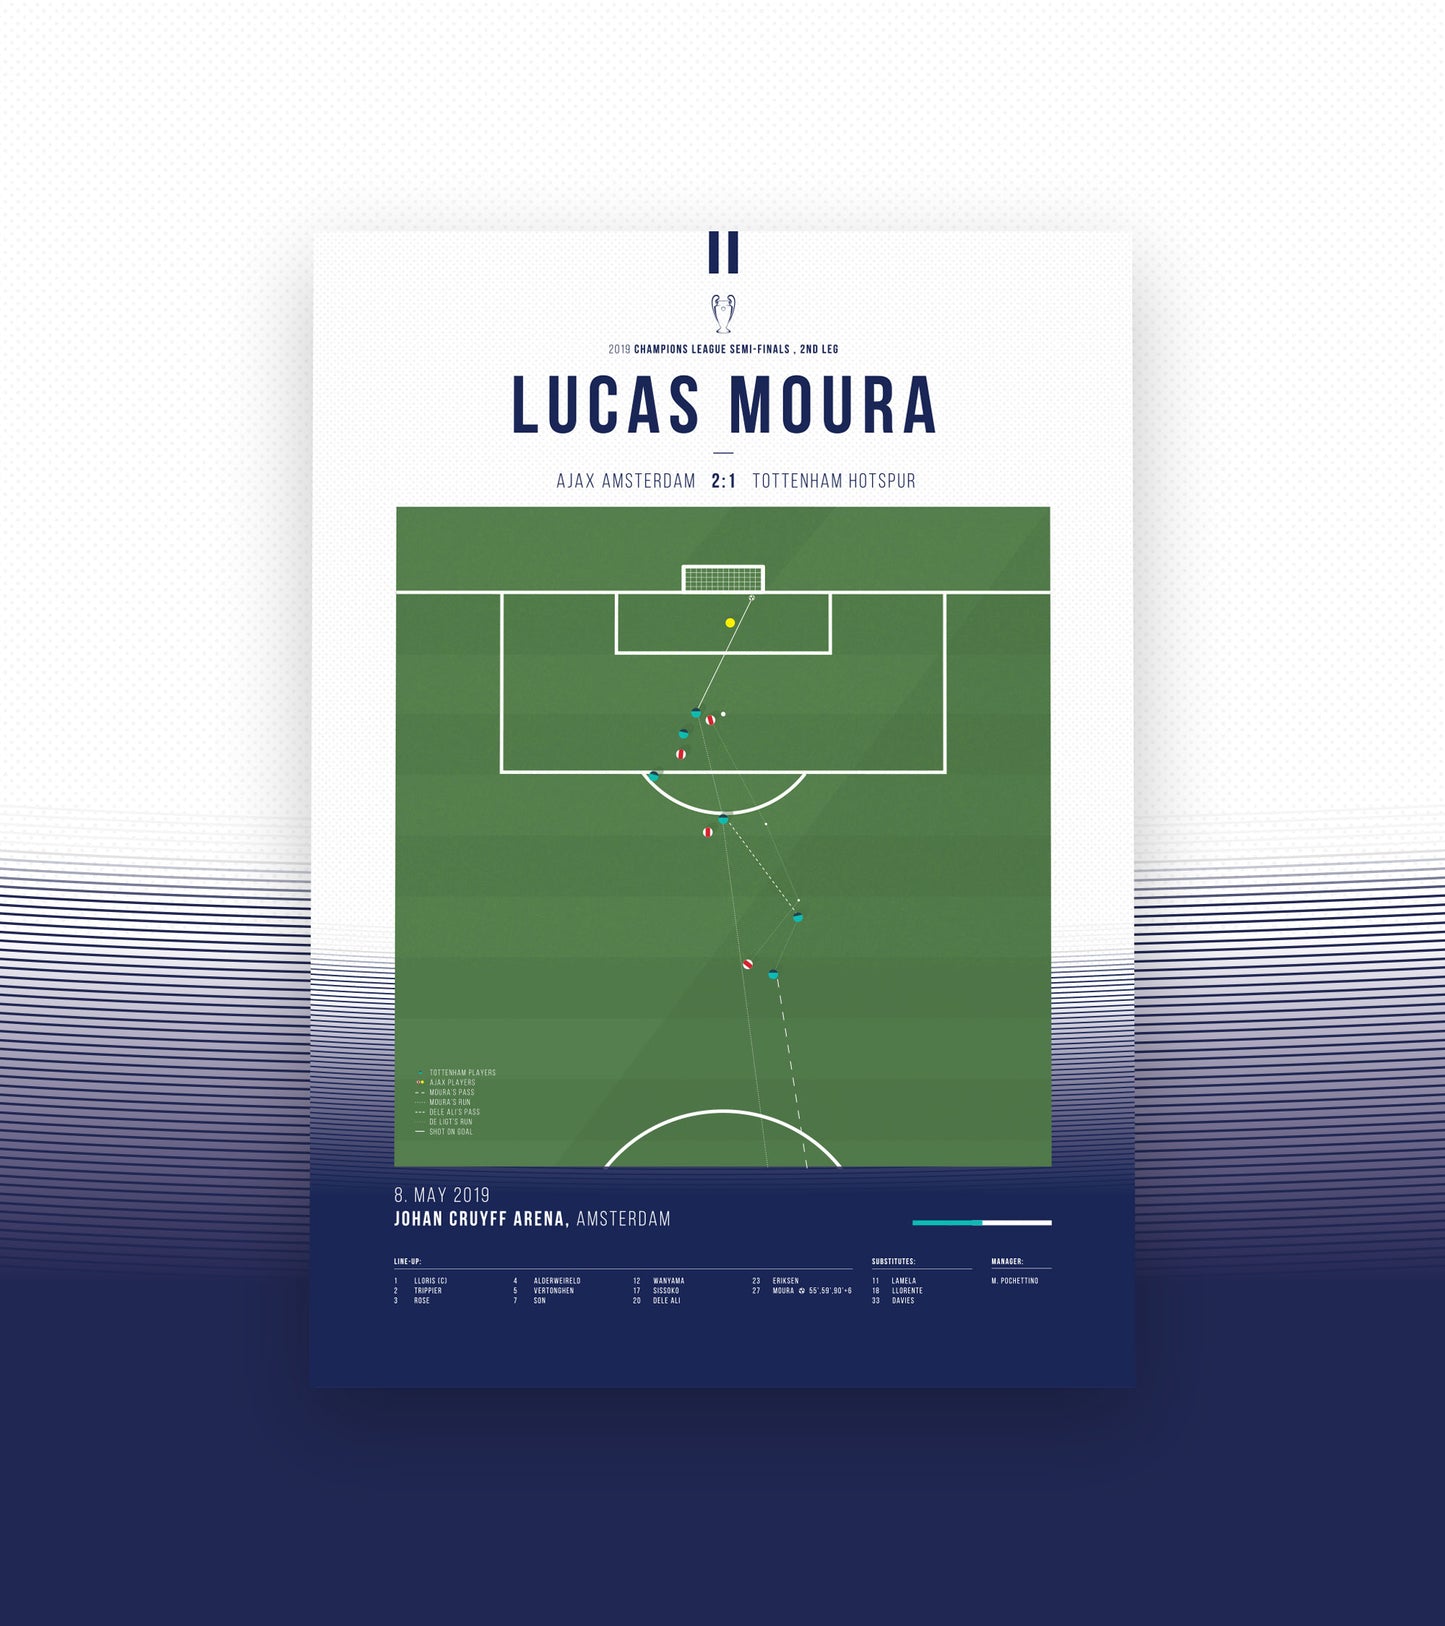 Lucas Moura's dramatic 96th-minute goal (1/3)